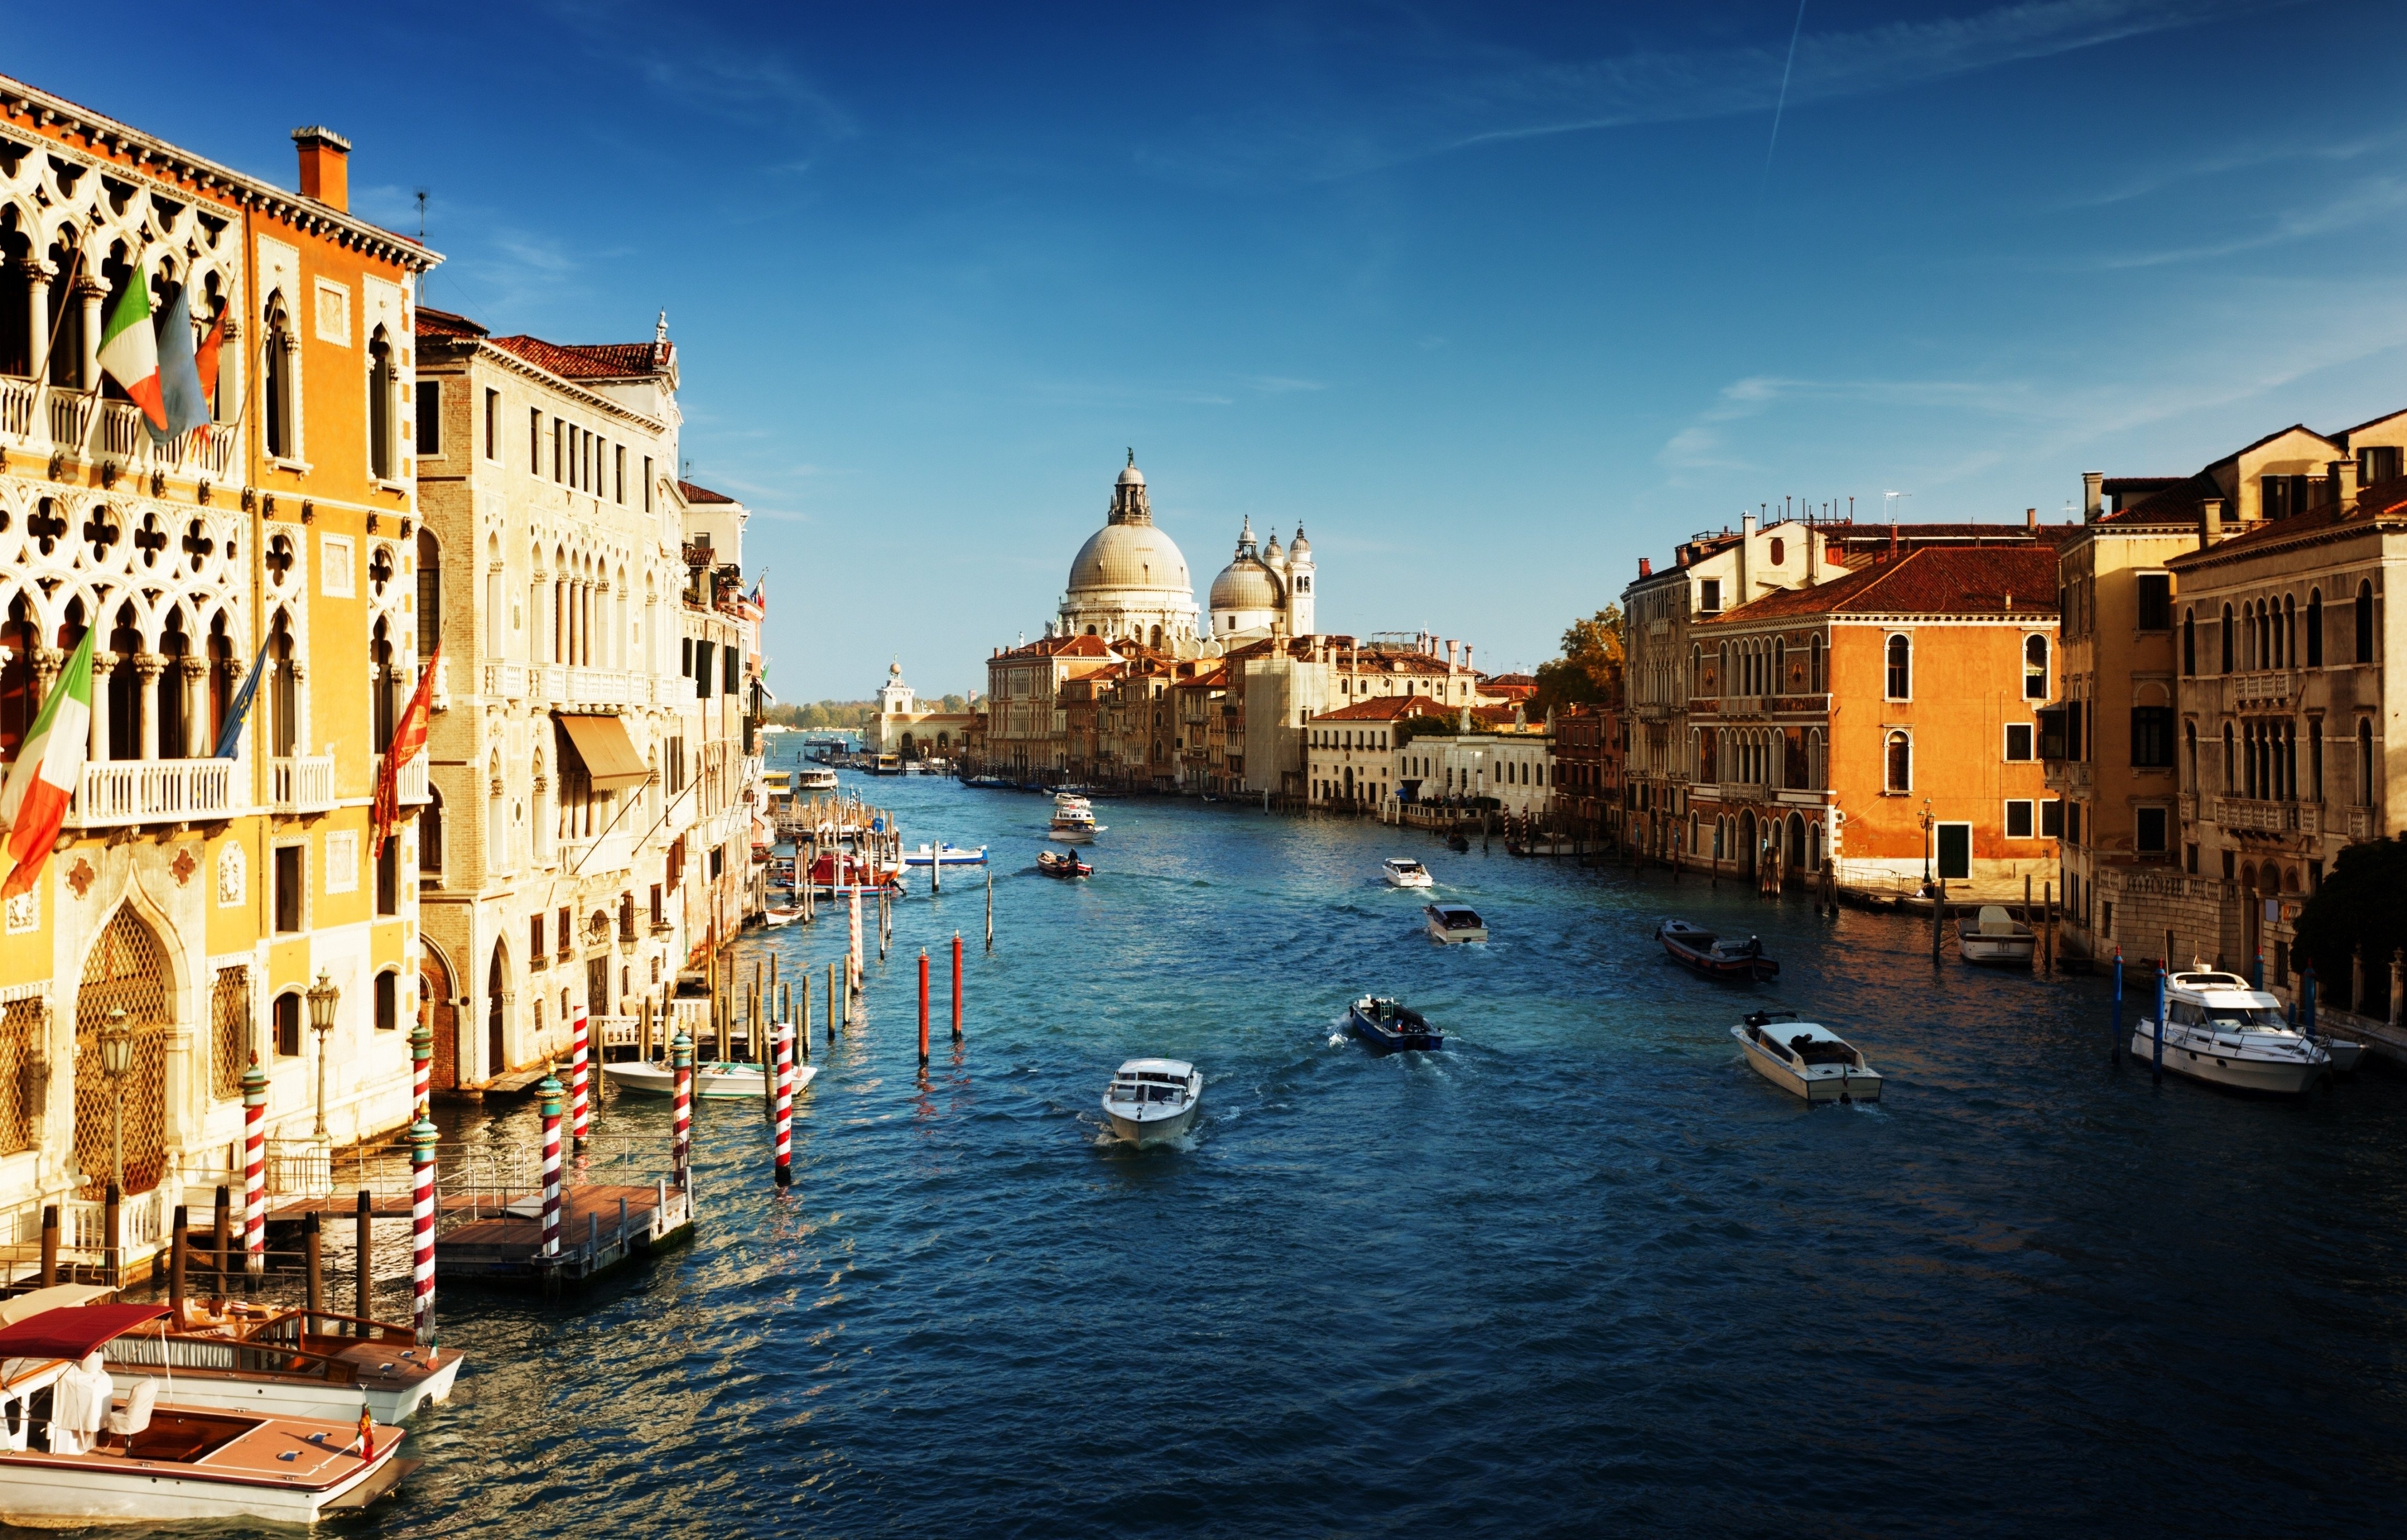 of Italy 4K wallpaper for your desktop or mobile screen